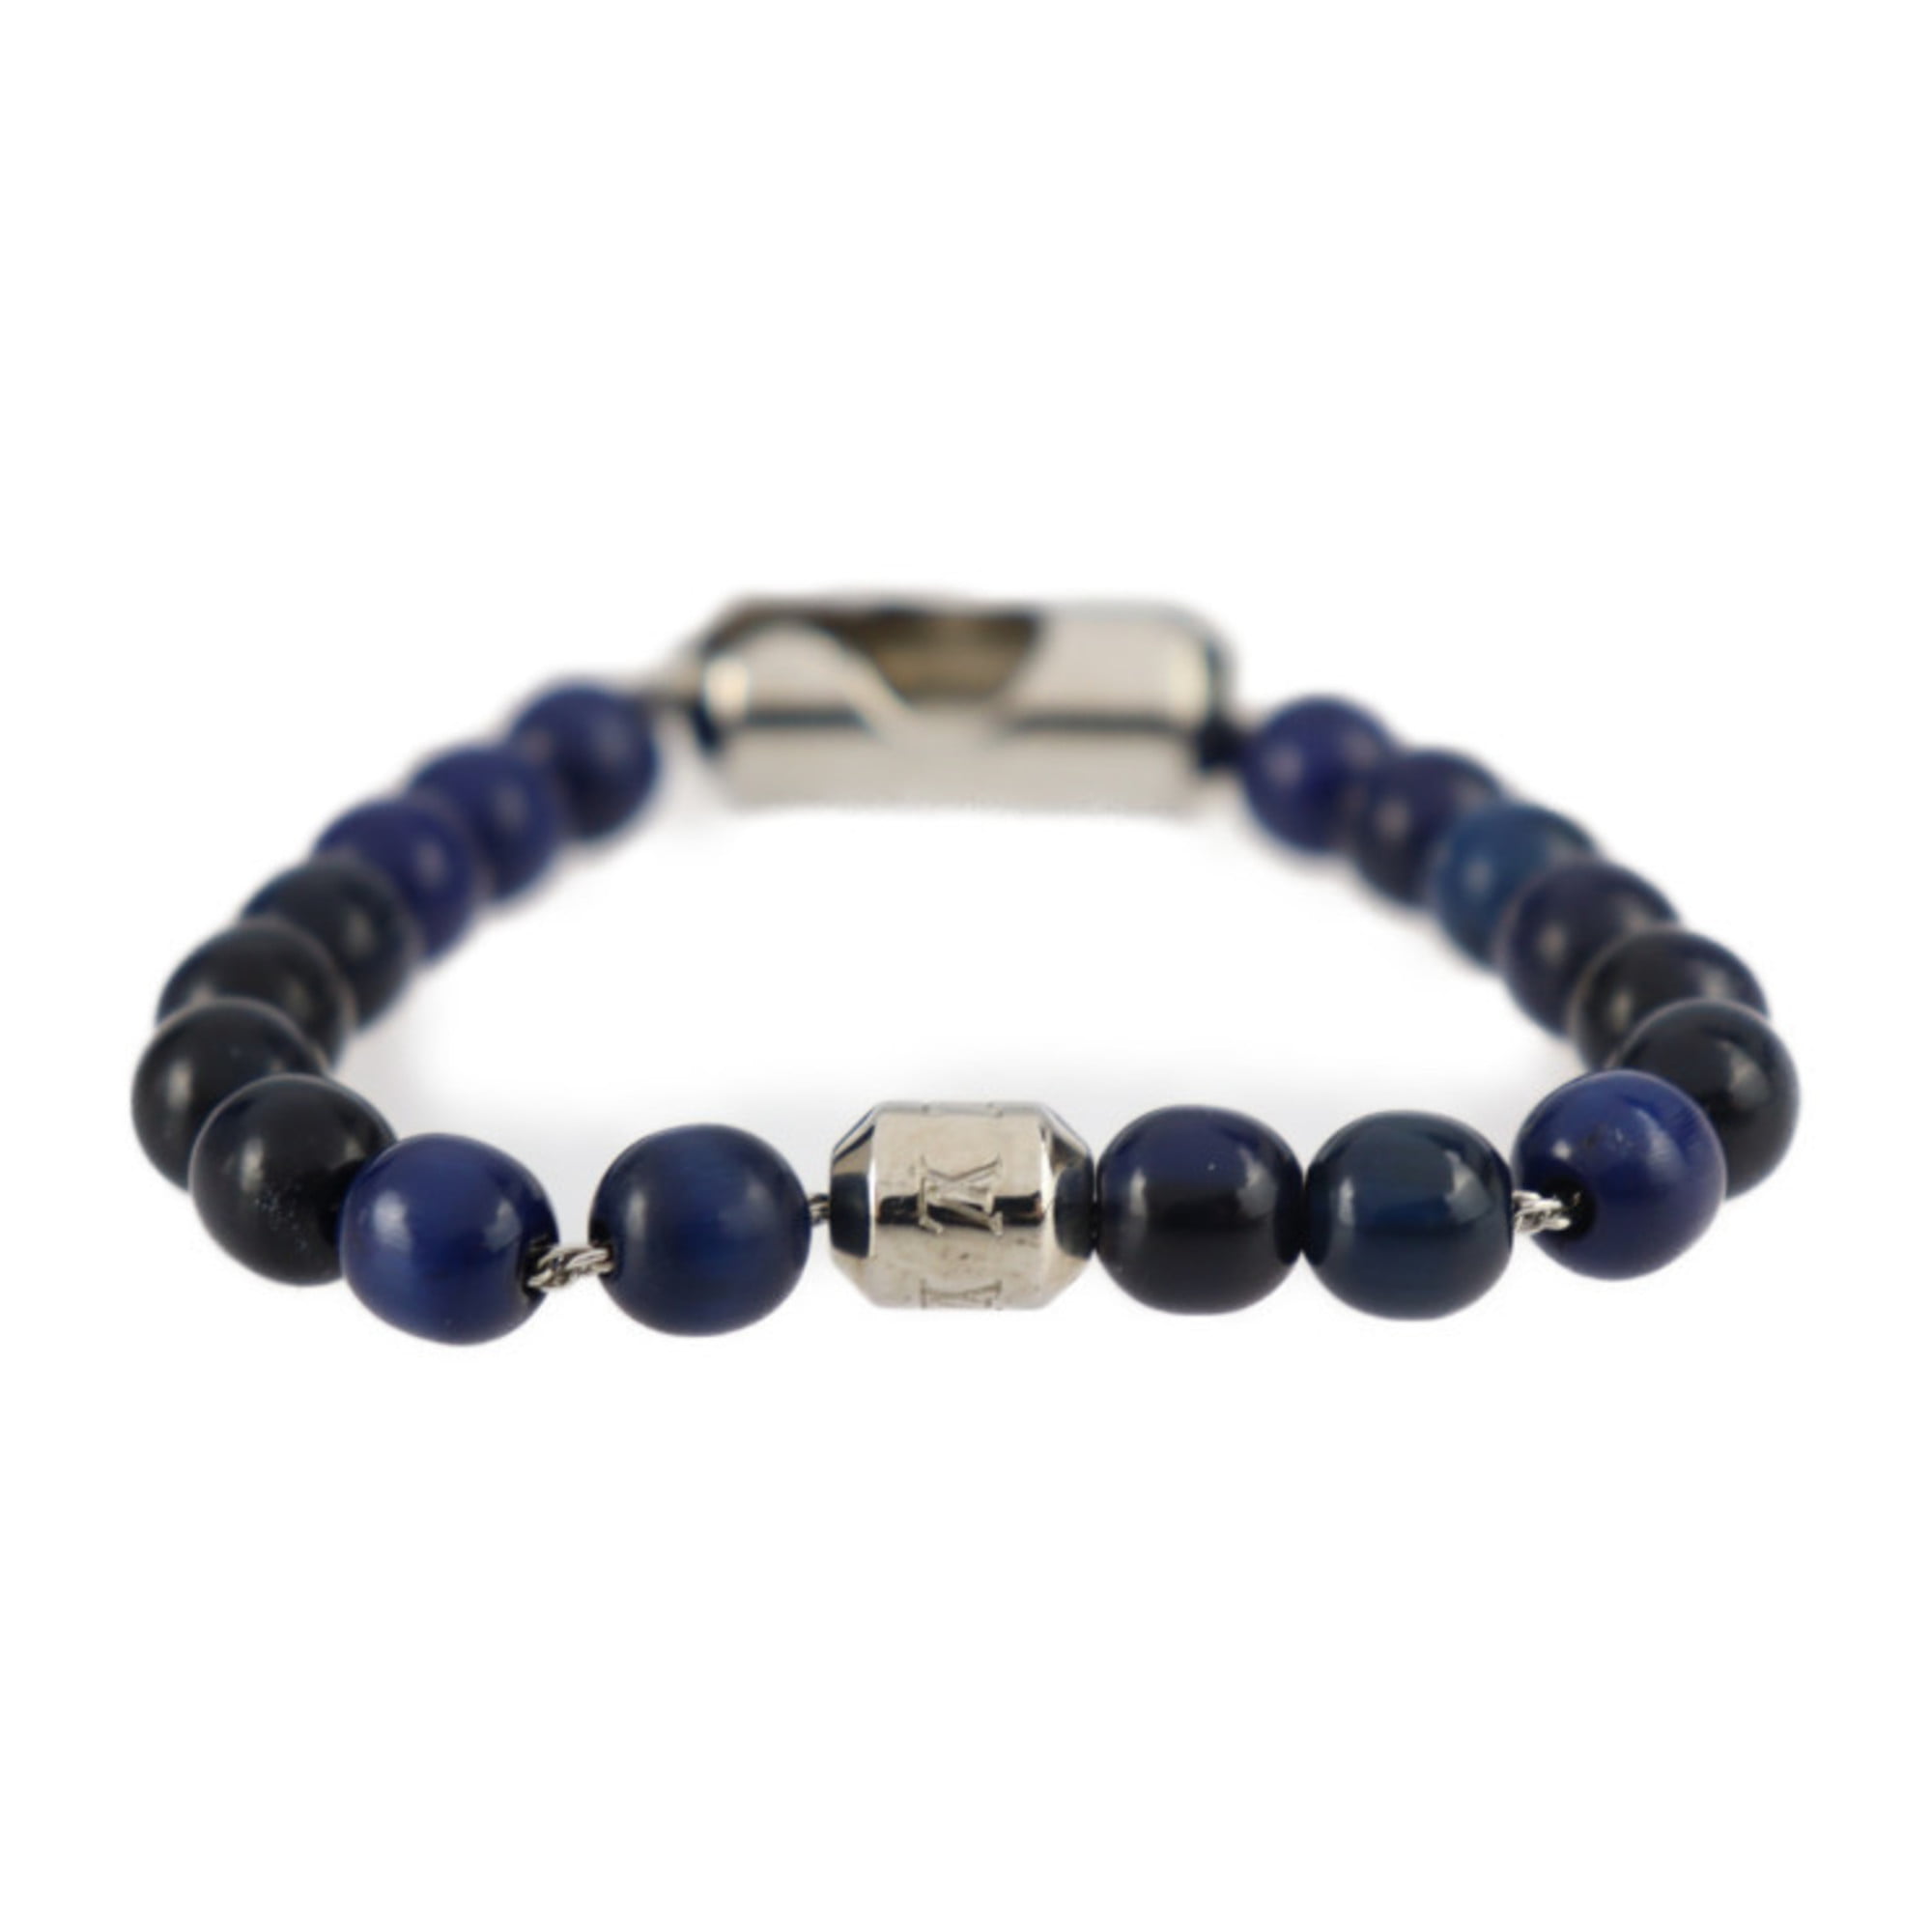 Authenticated used Louis Vuitton Louis Vuitton Brasserie Pearls LV Aloha Bracelet M63656 Navy Series Silver Metal Fittings, Adult Unisex, Size: One